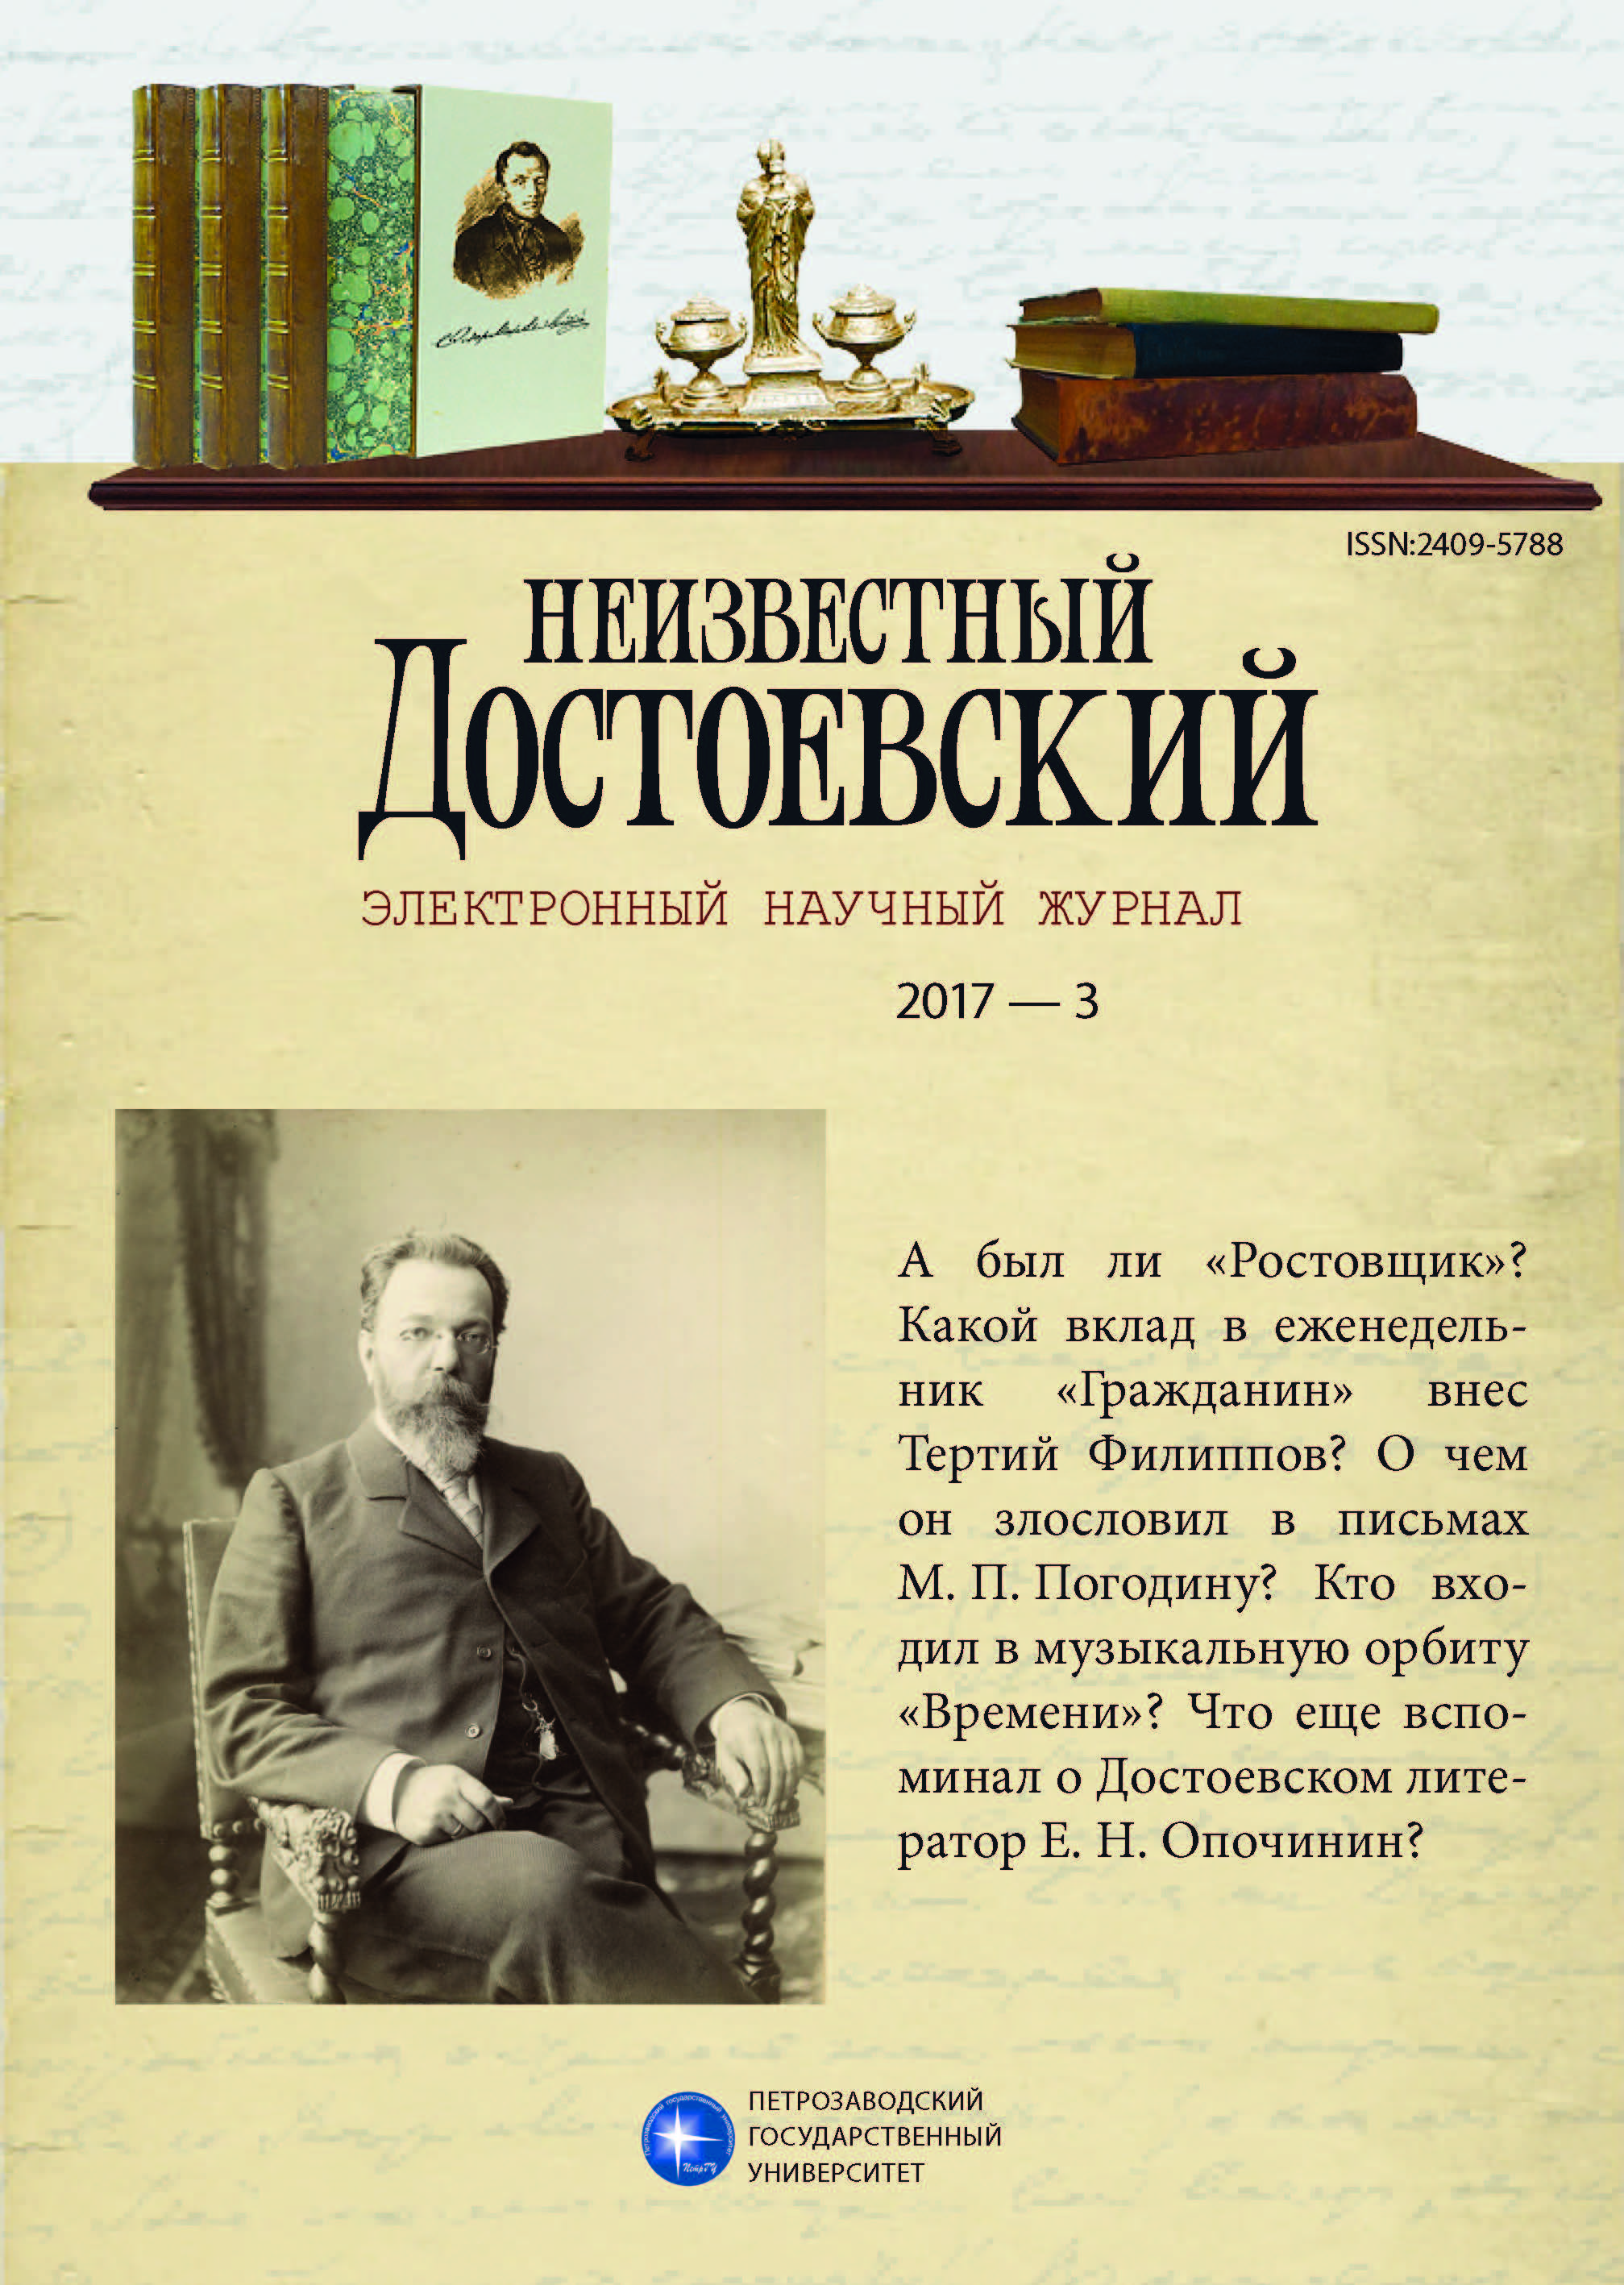 E. N. Opochinin and His Diary Notes About F. M. Dostoevsky: Known and Unknown Cover Image